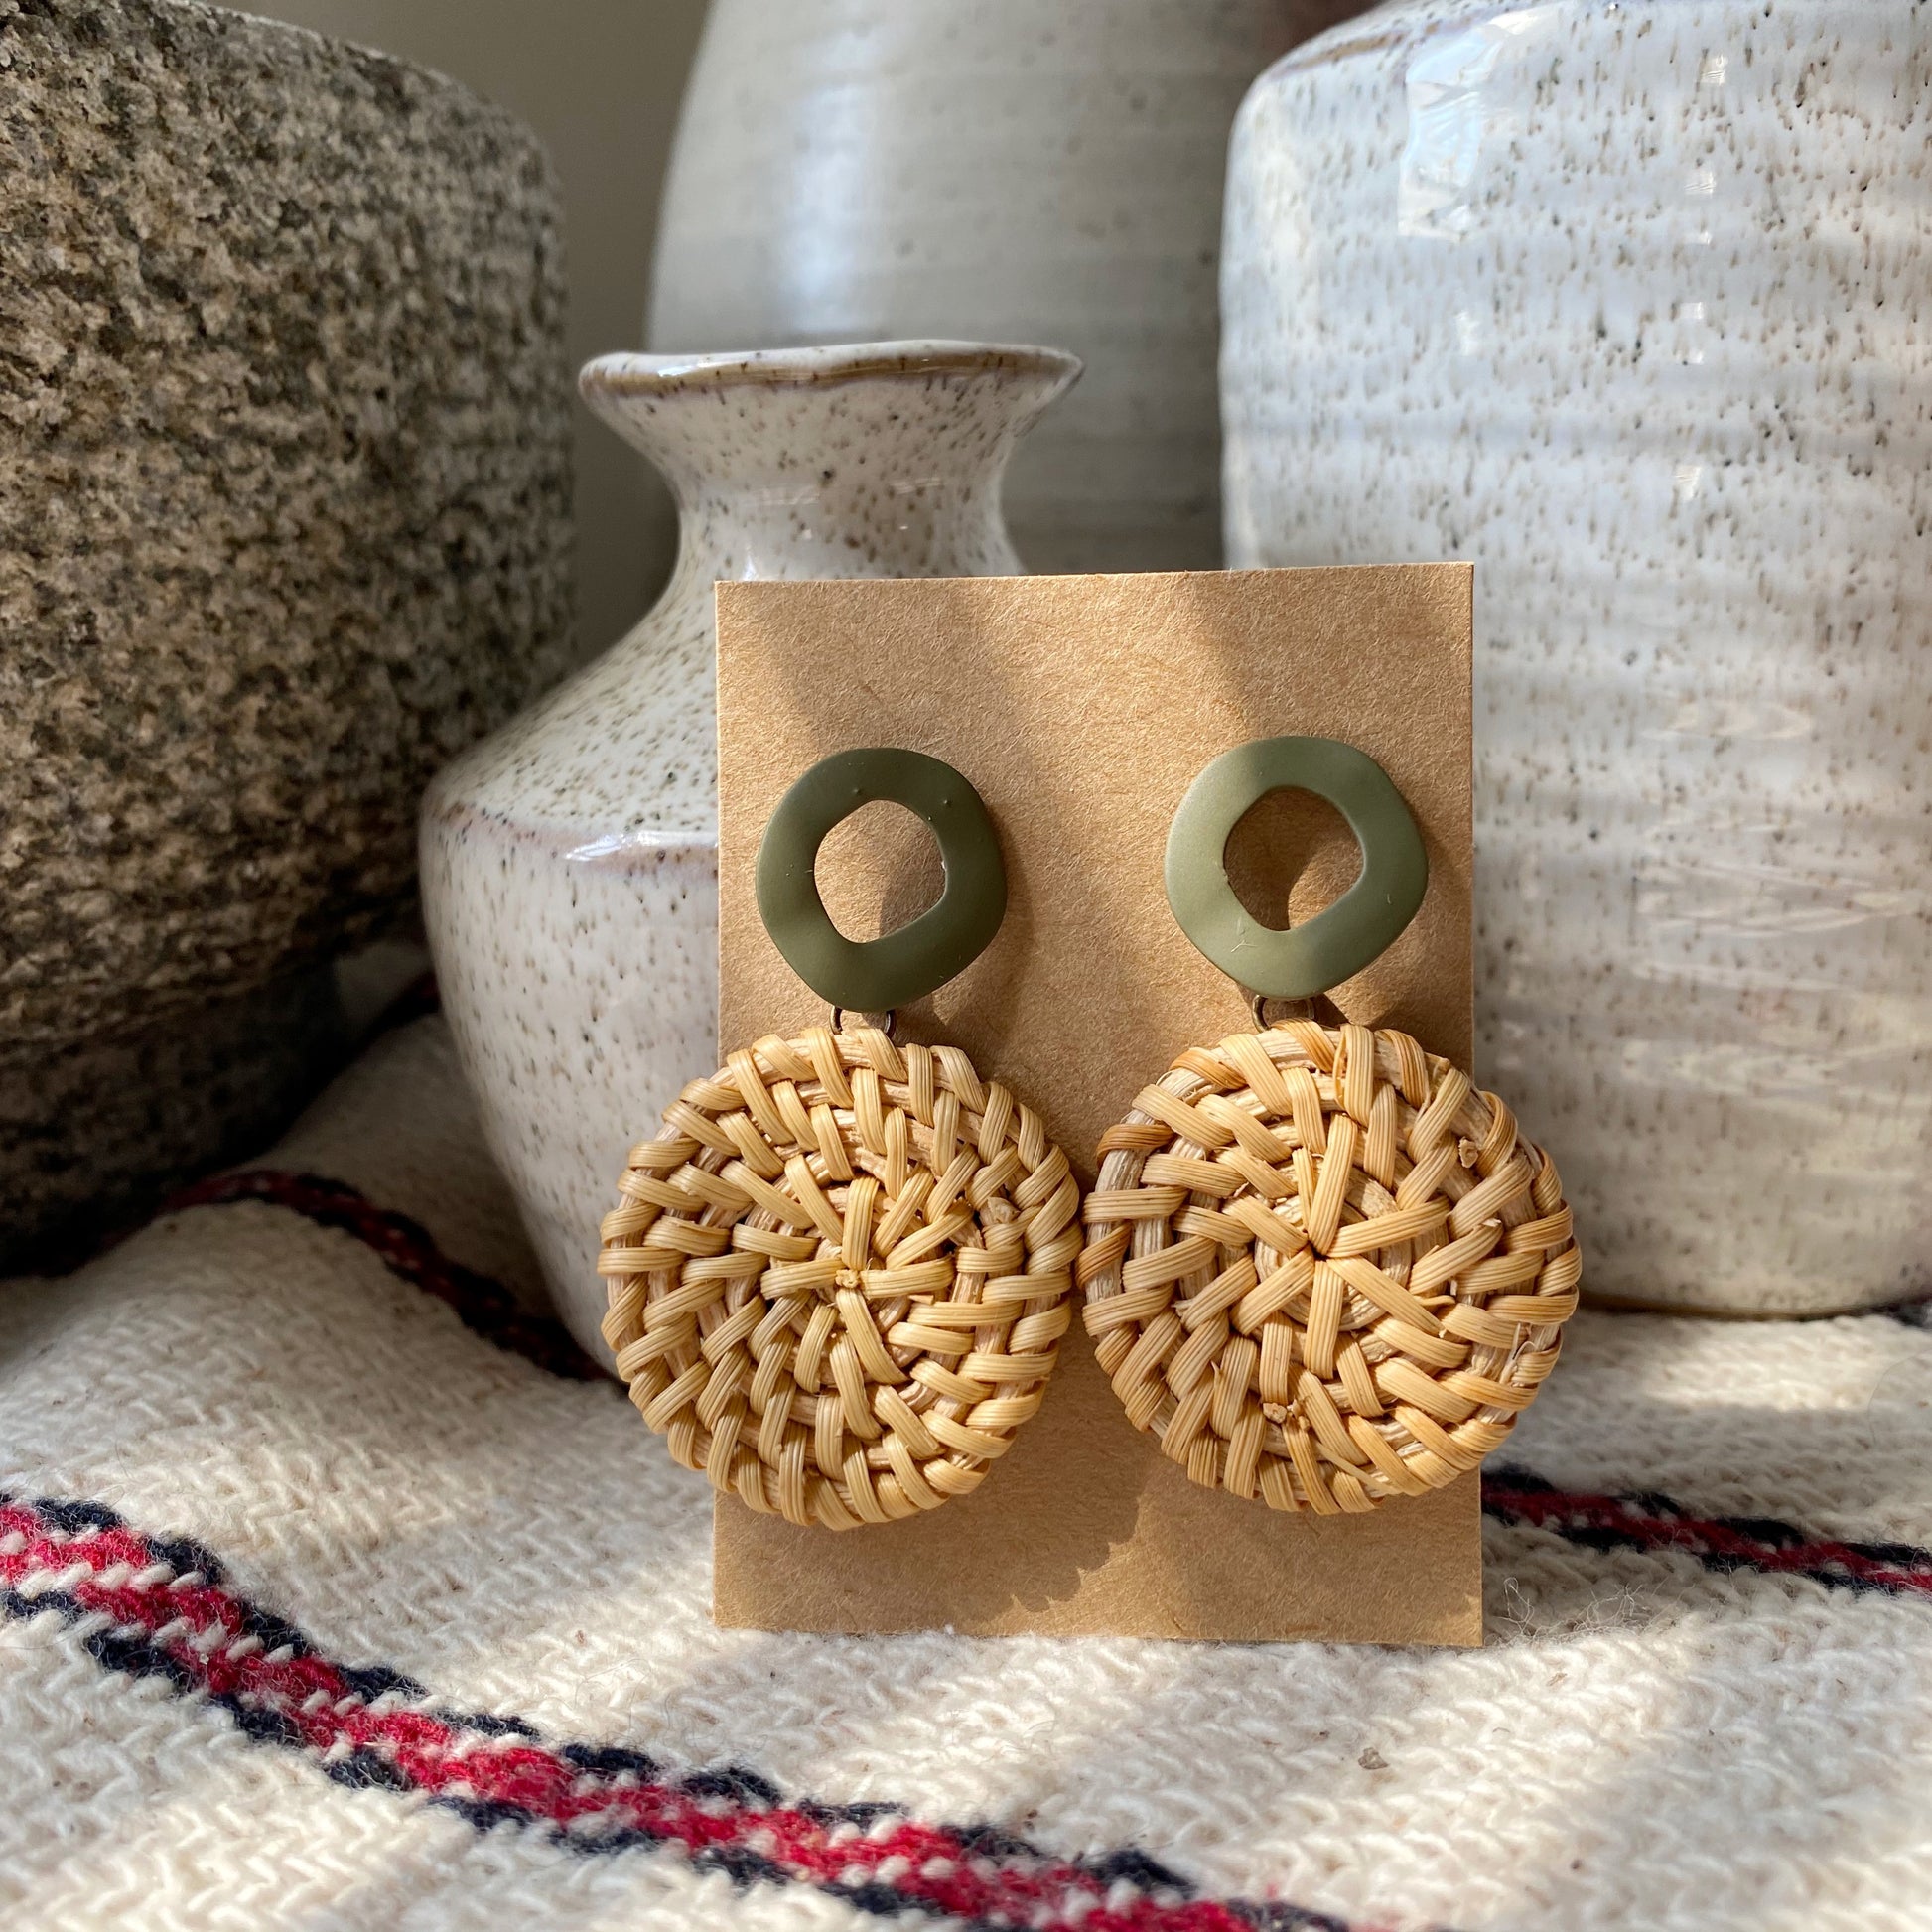 Handmade, natural, and lightweight statement earrings. These rattan drop earrings are perfect for a special occasion or casual everyday wear. Available in a variety of accent colors to pair with any style!